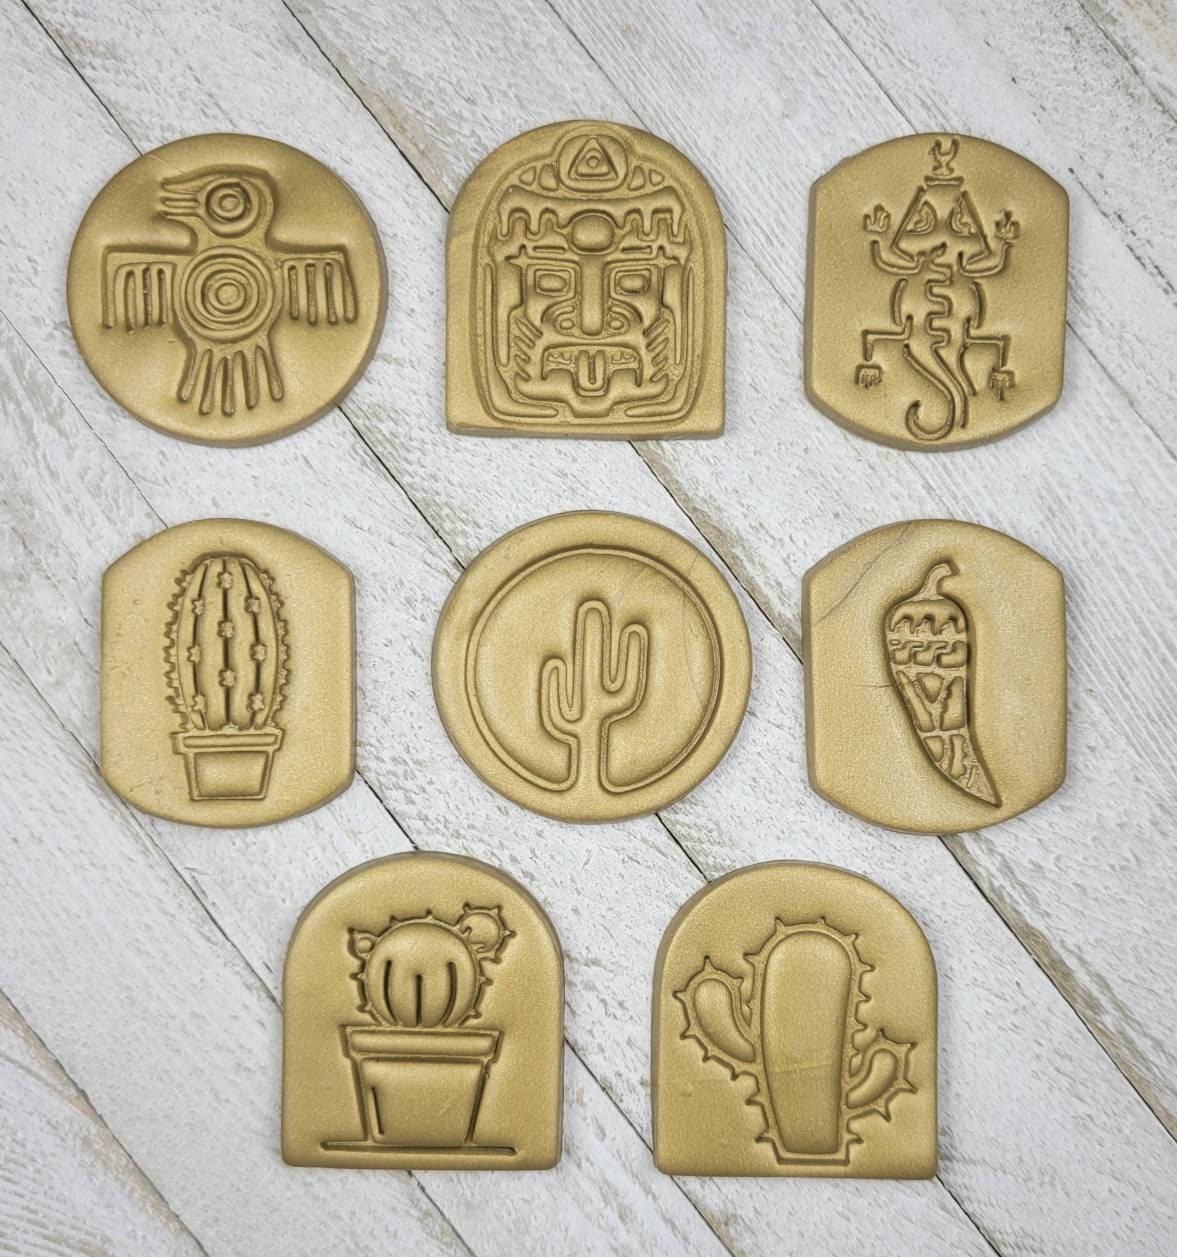 ImpressArt CHACANA Metal Stamp 6mm, Southwest Design, Metal Stamping Tool,  Incan Cross Hand Stamp, Stamps Metal, Clay and Leather